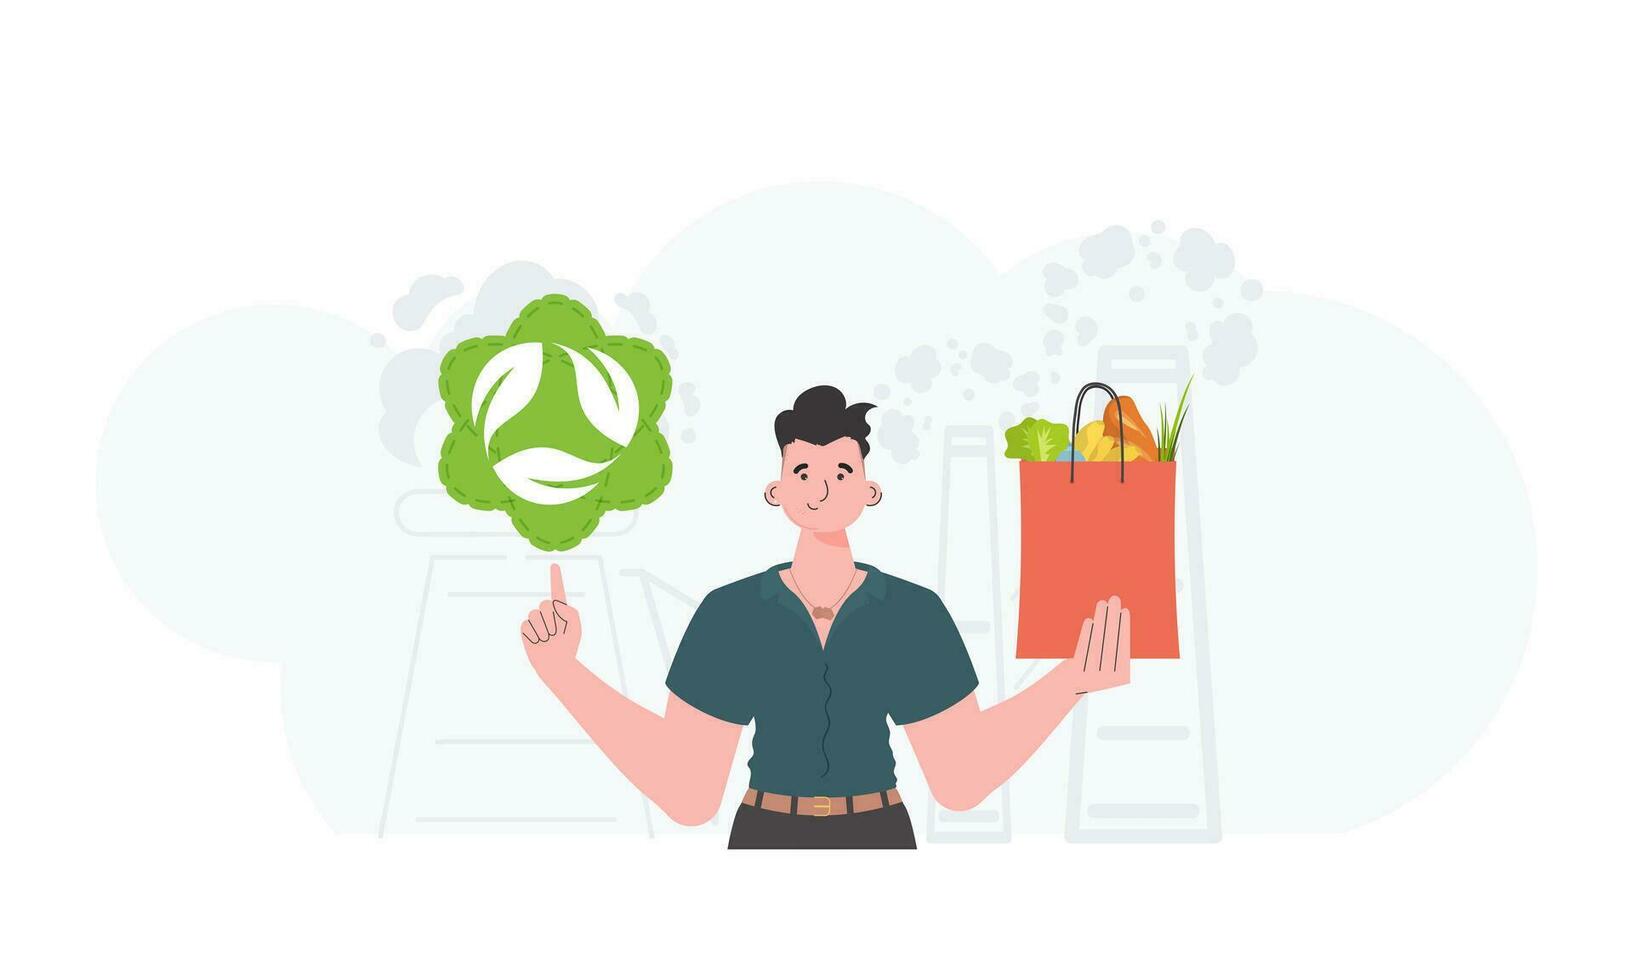 The guy is shown waist-deep holding an EKO icon and a bag of proper nutrition. Healthy food, ecology, recycling and zero waste concept. Trend style, vector illustration.